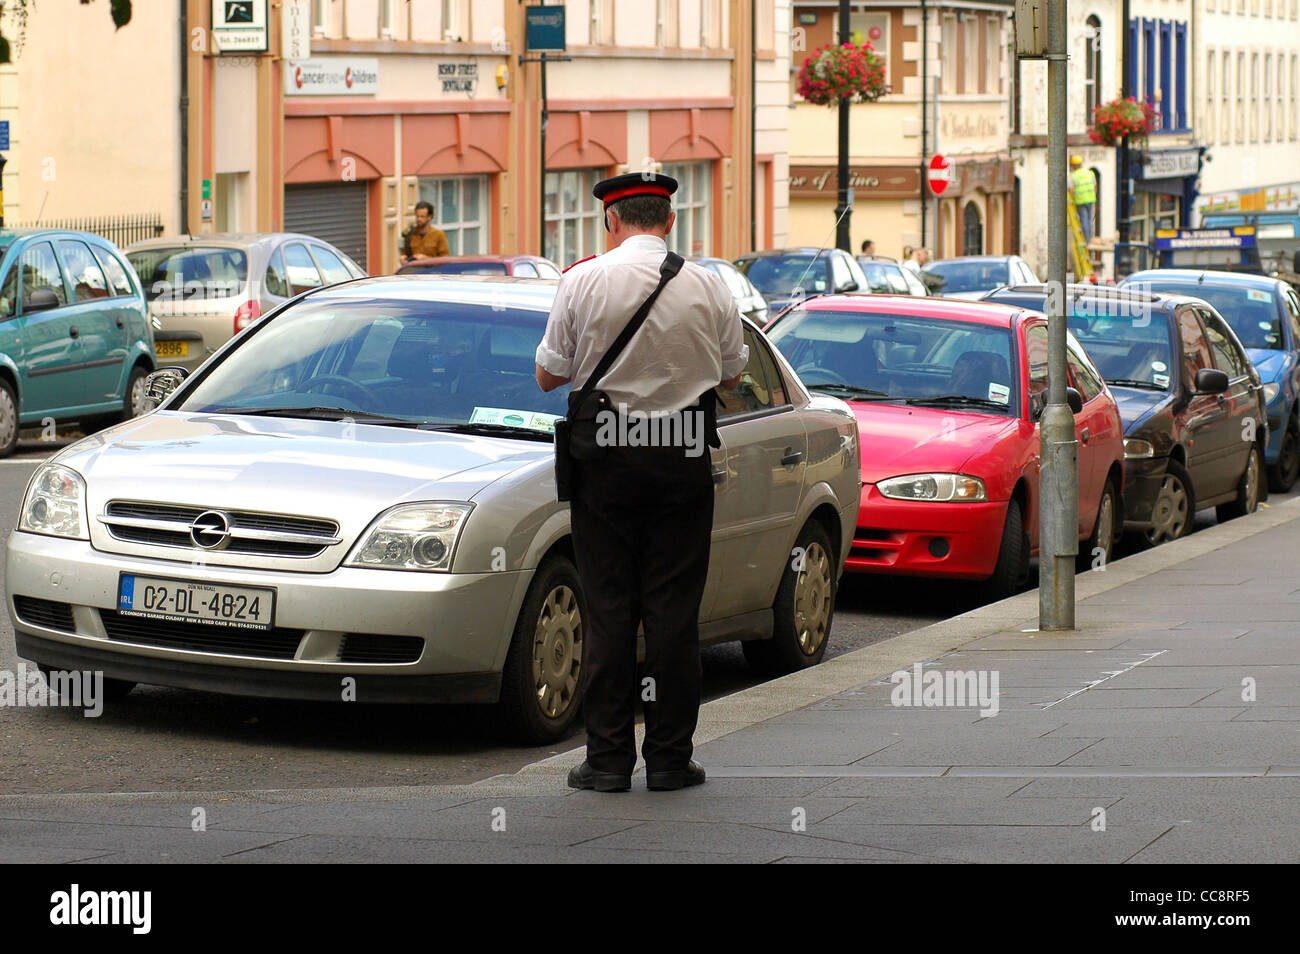 Traffic warden issuing a ticket for a parking offence, Londonderry,Northern Ireland,UK Stock Photo